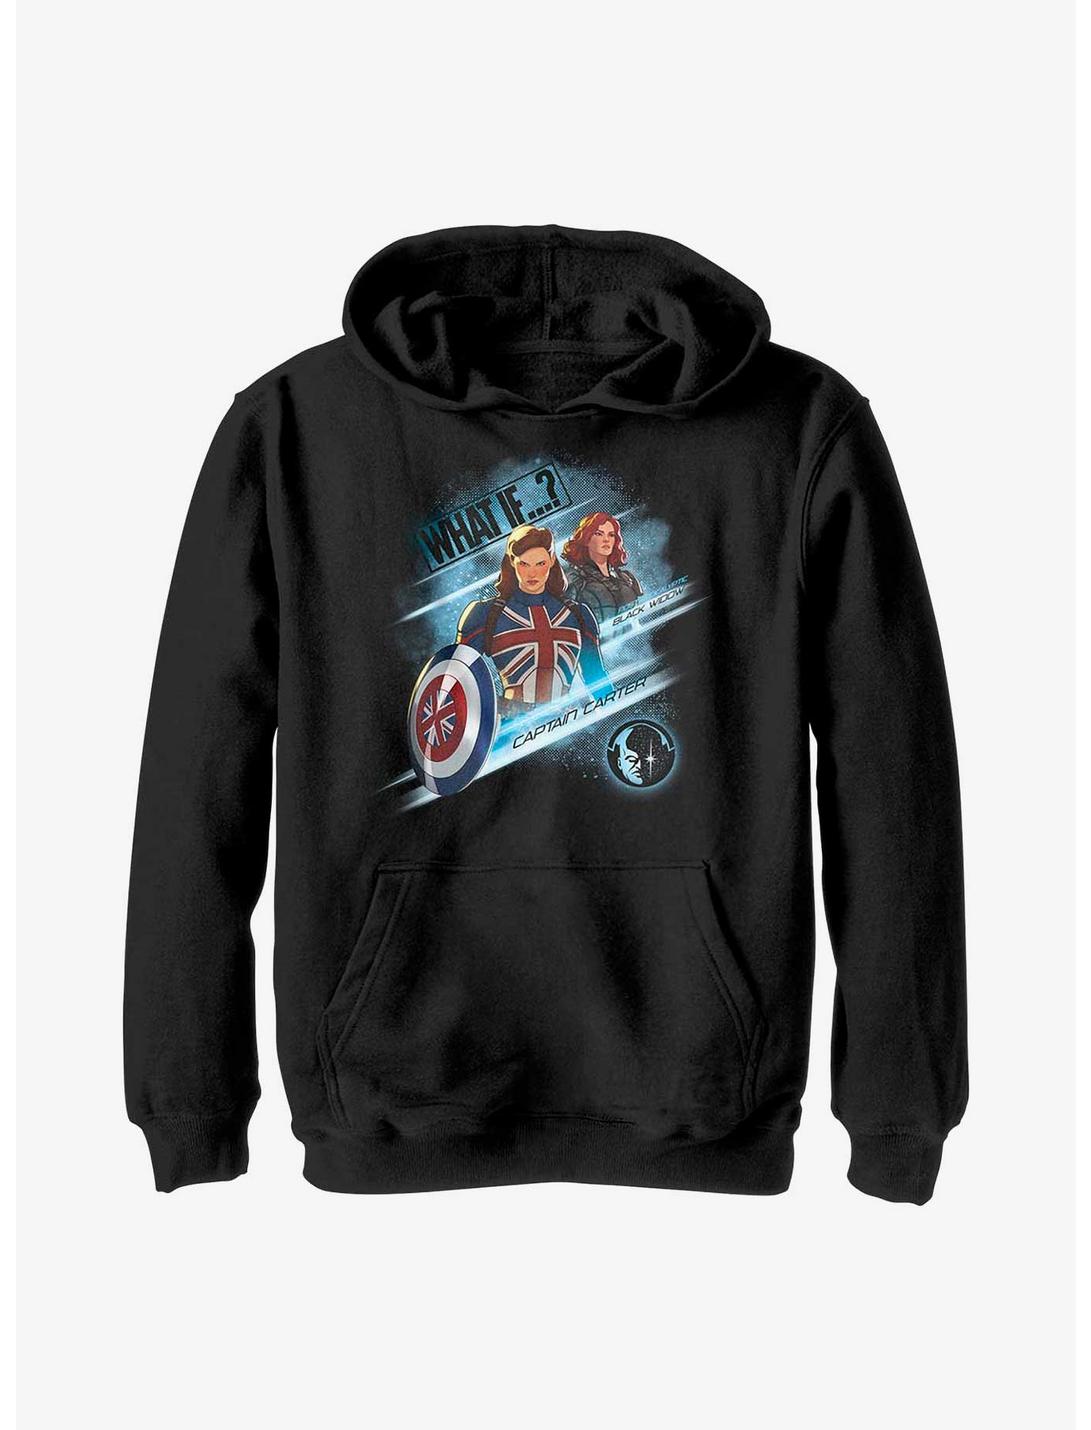 Plus Size Marvel What If?? Captain Carter & Black Widow Team Up Youth Hoodie, BLACK, hi-res